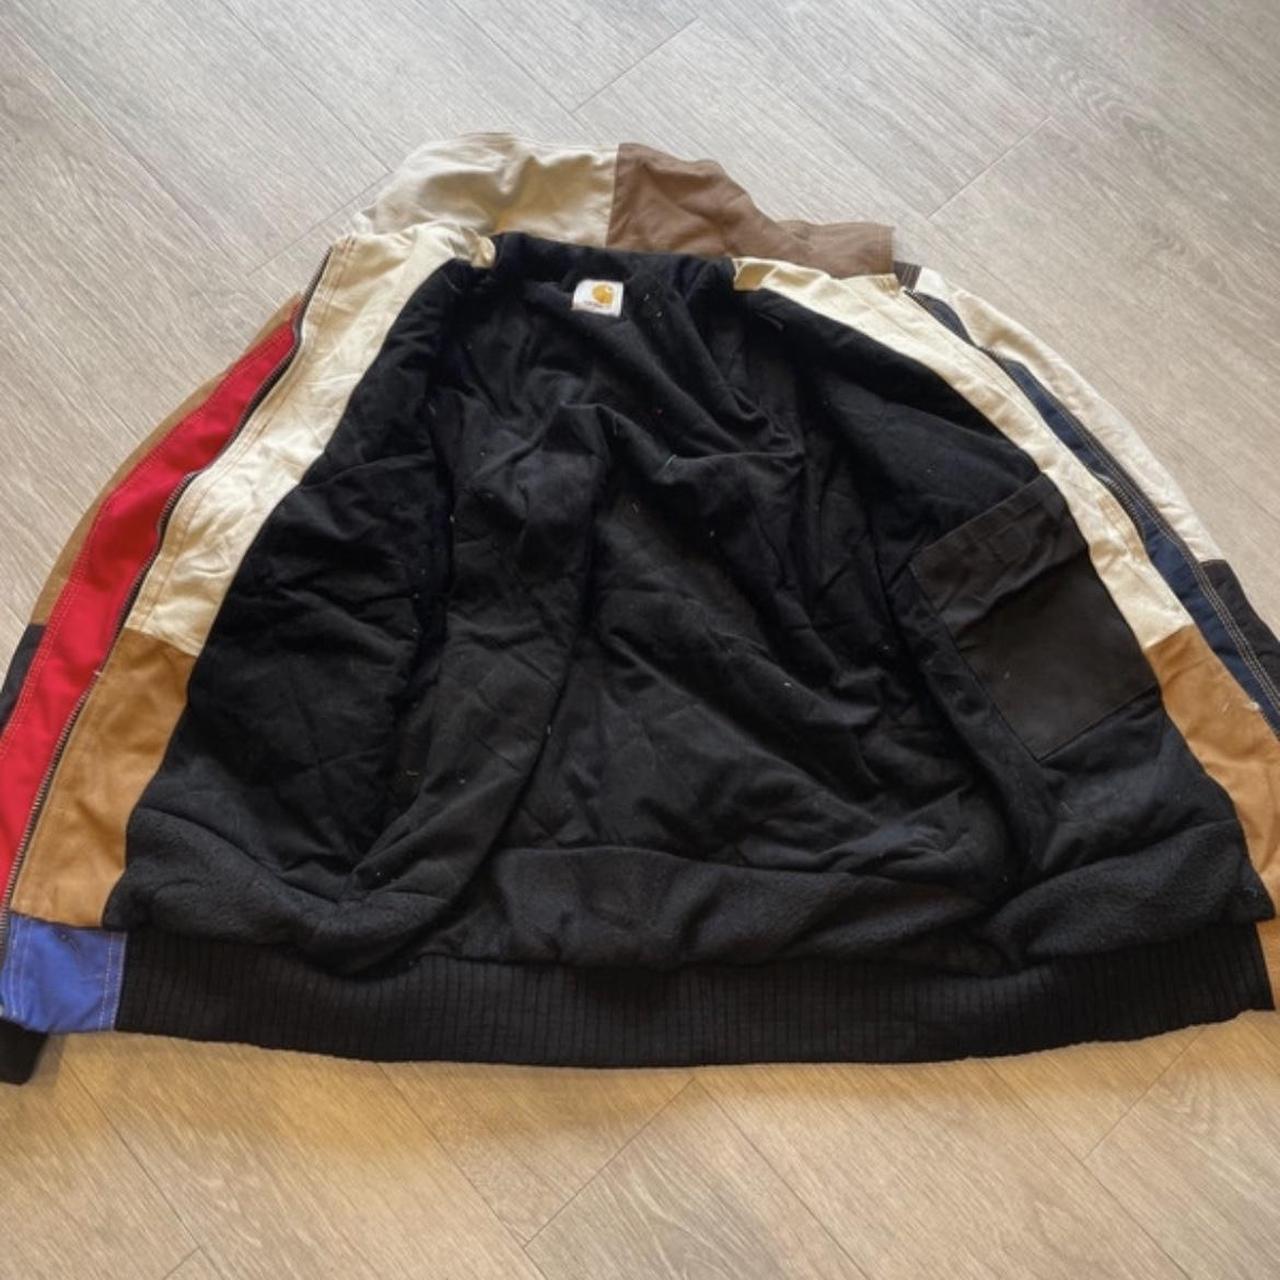 Carhartt Reworked canvas Jacket This is a reworked - Depop